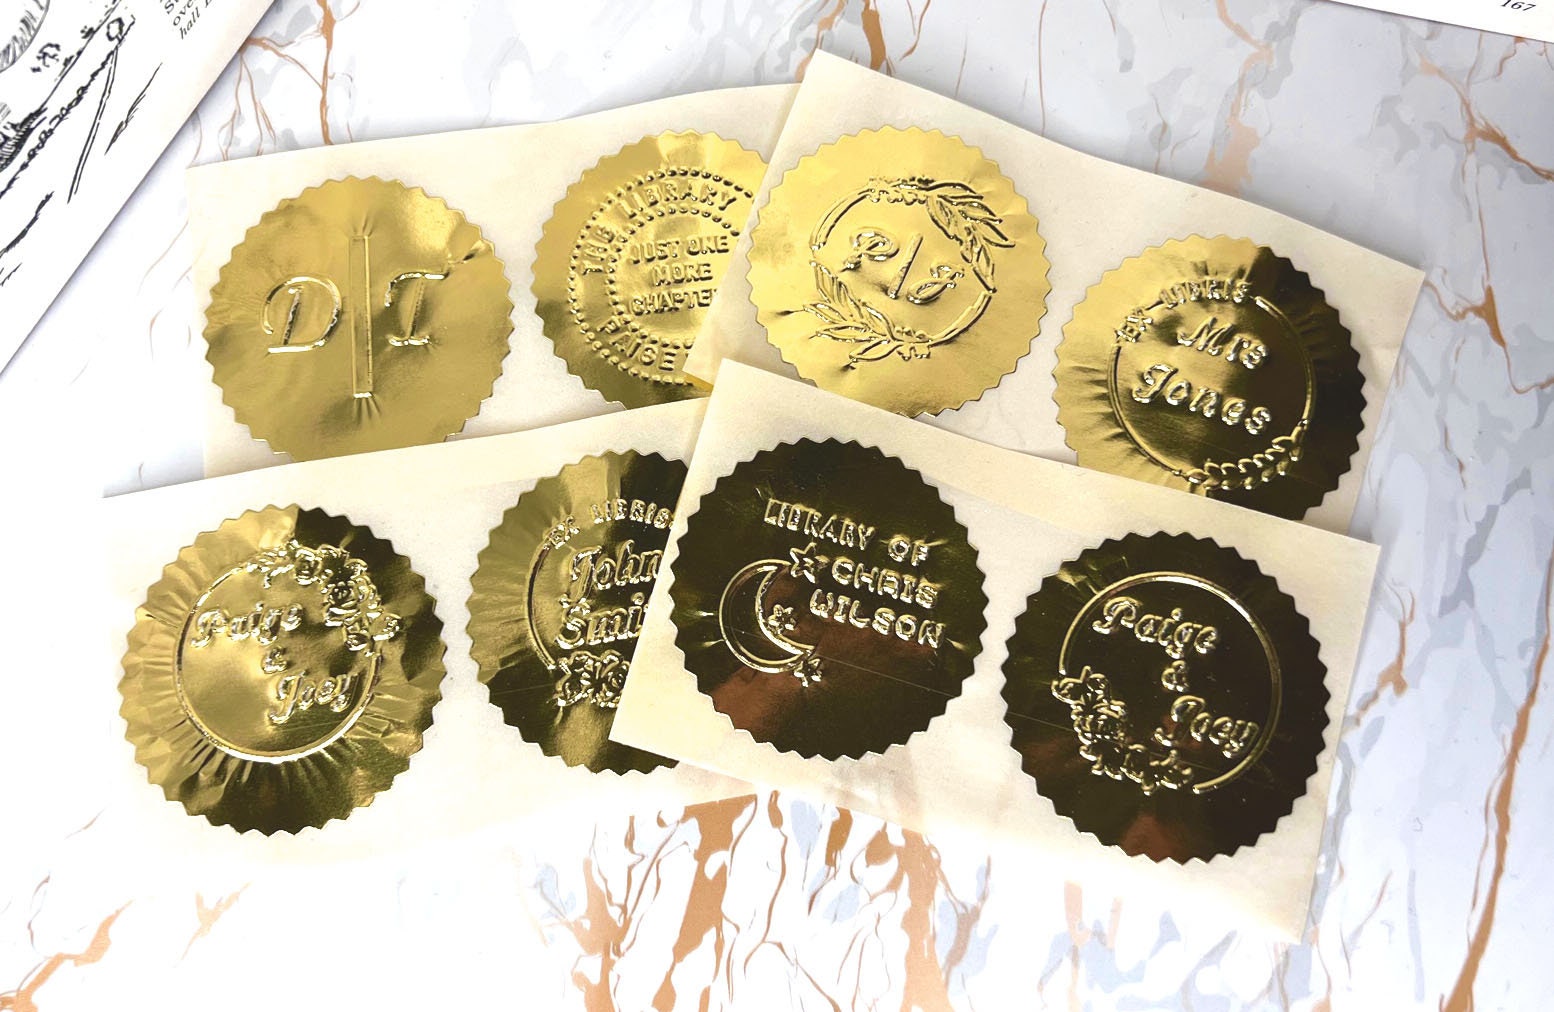 Gold Foil Embossed Stickers, Embossed Raised Sticker/label, Embossing Seal  Stickers, Foil/metallic Seal, Business/wedding/gift Stickers 